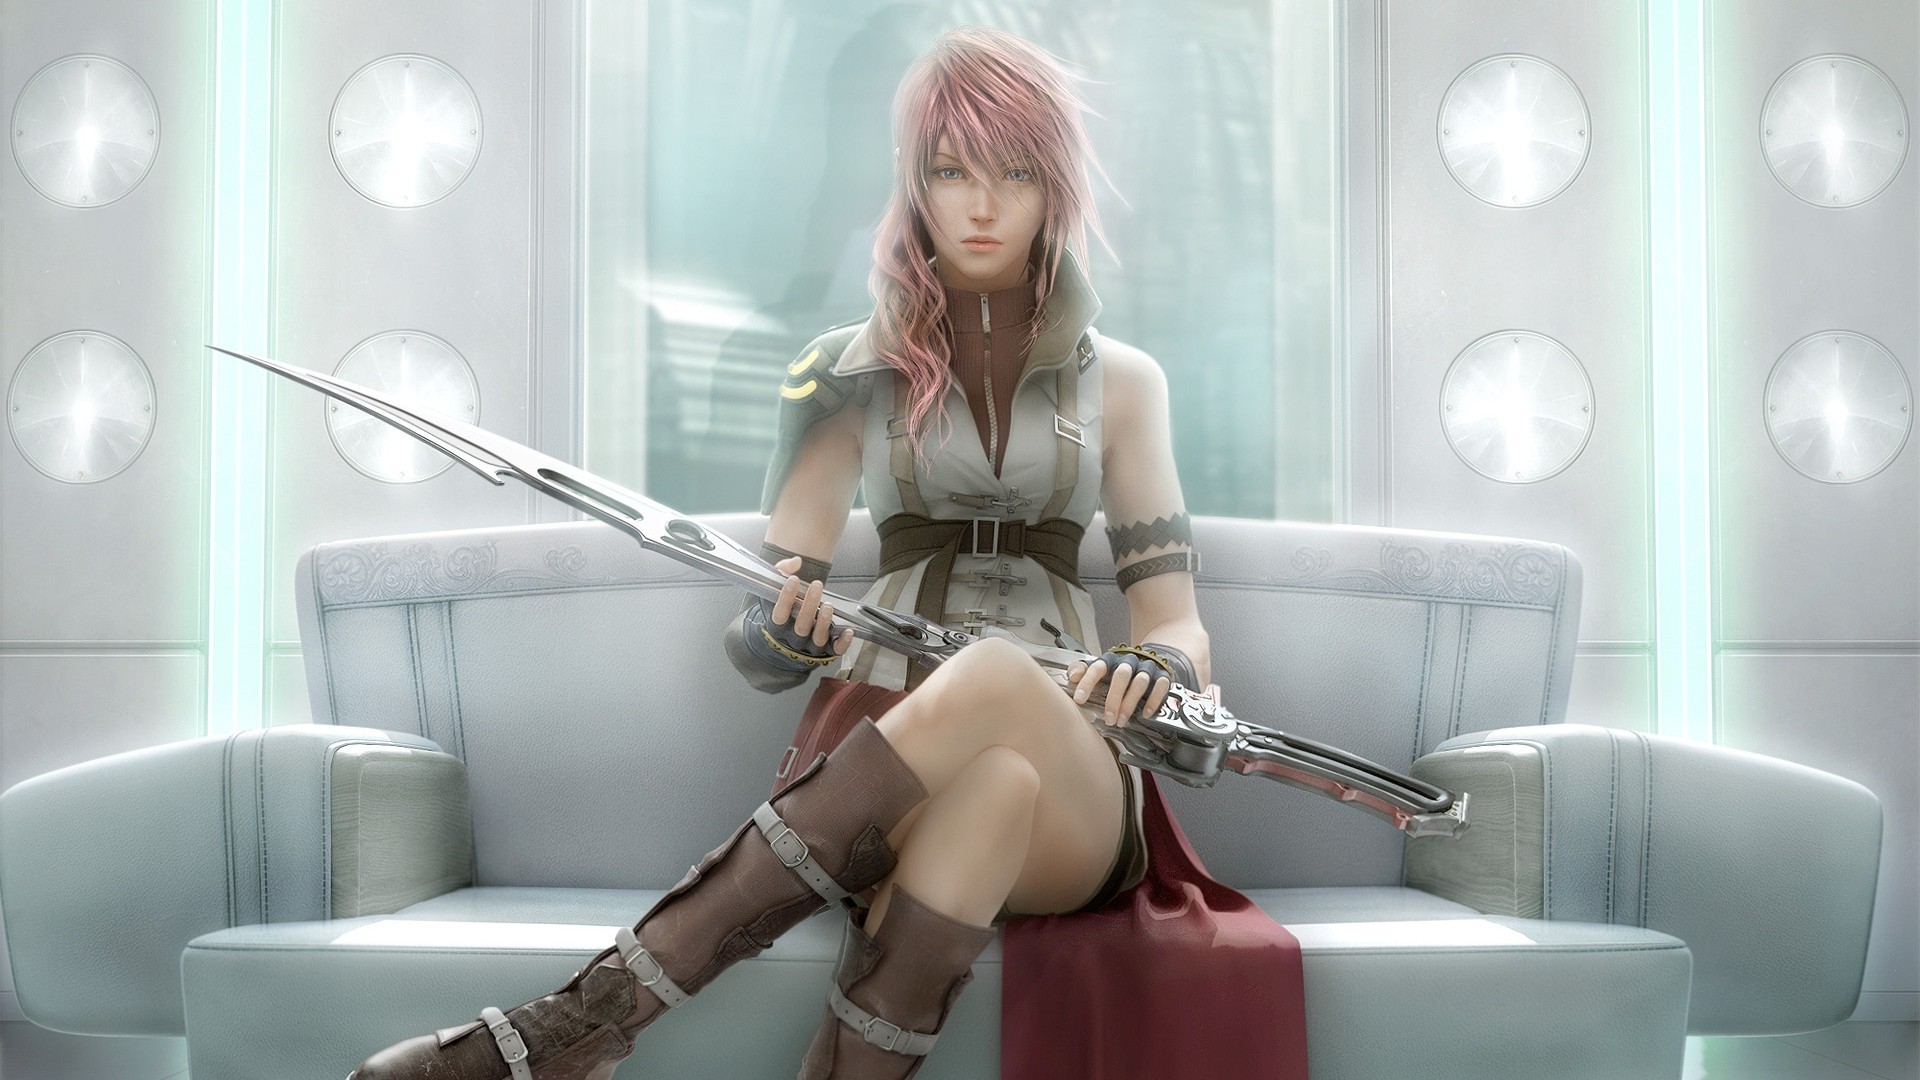 Final Fantasy Xiii Claire Farron Wallpapers Hd Desktop And Mobile Backgrounds